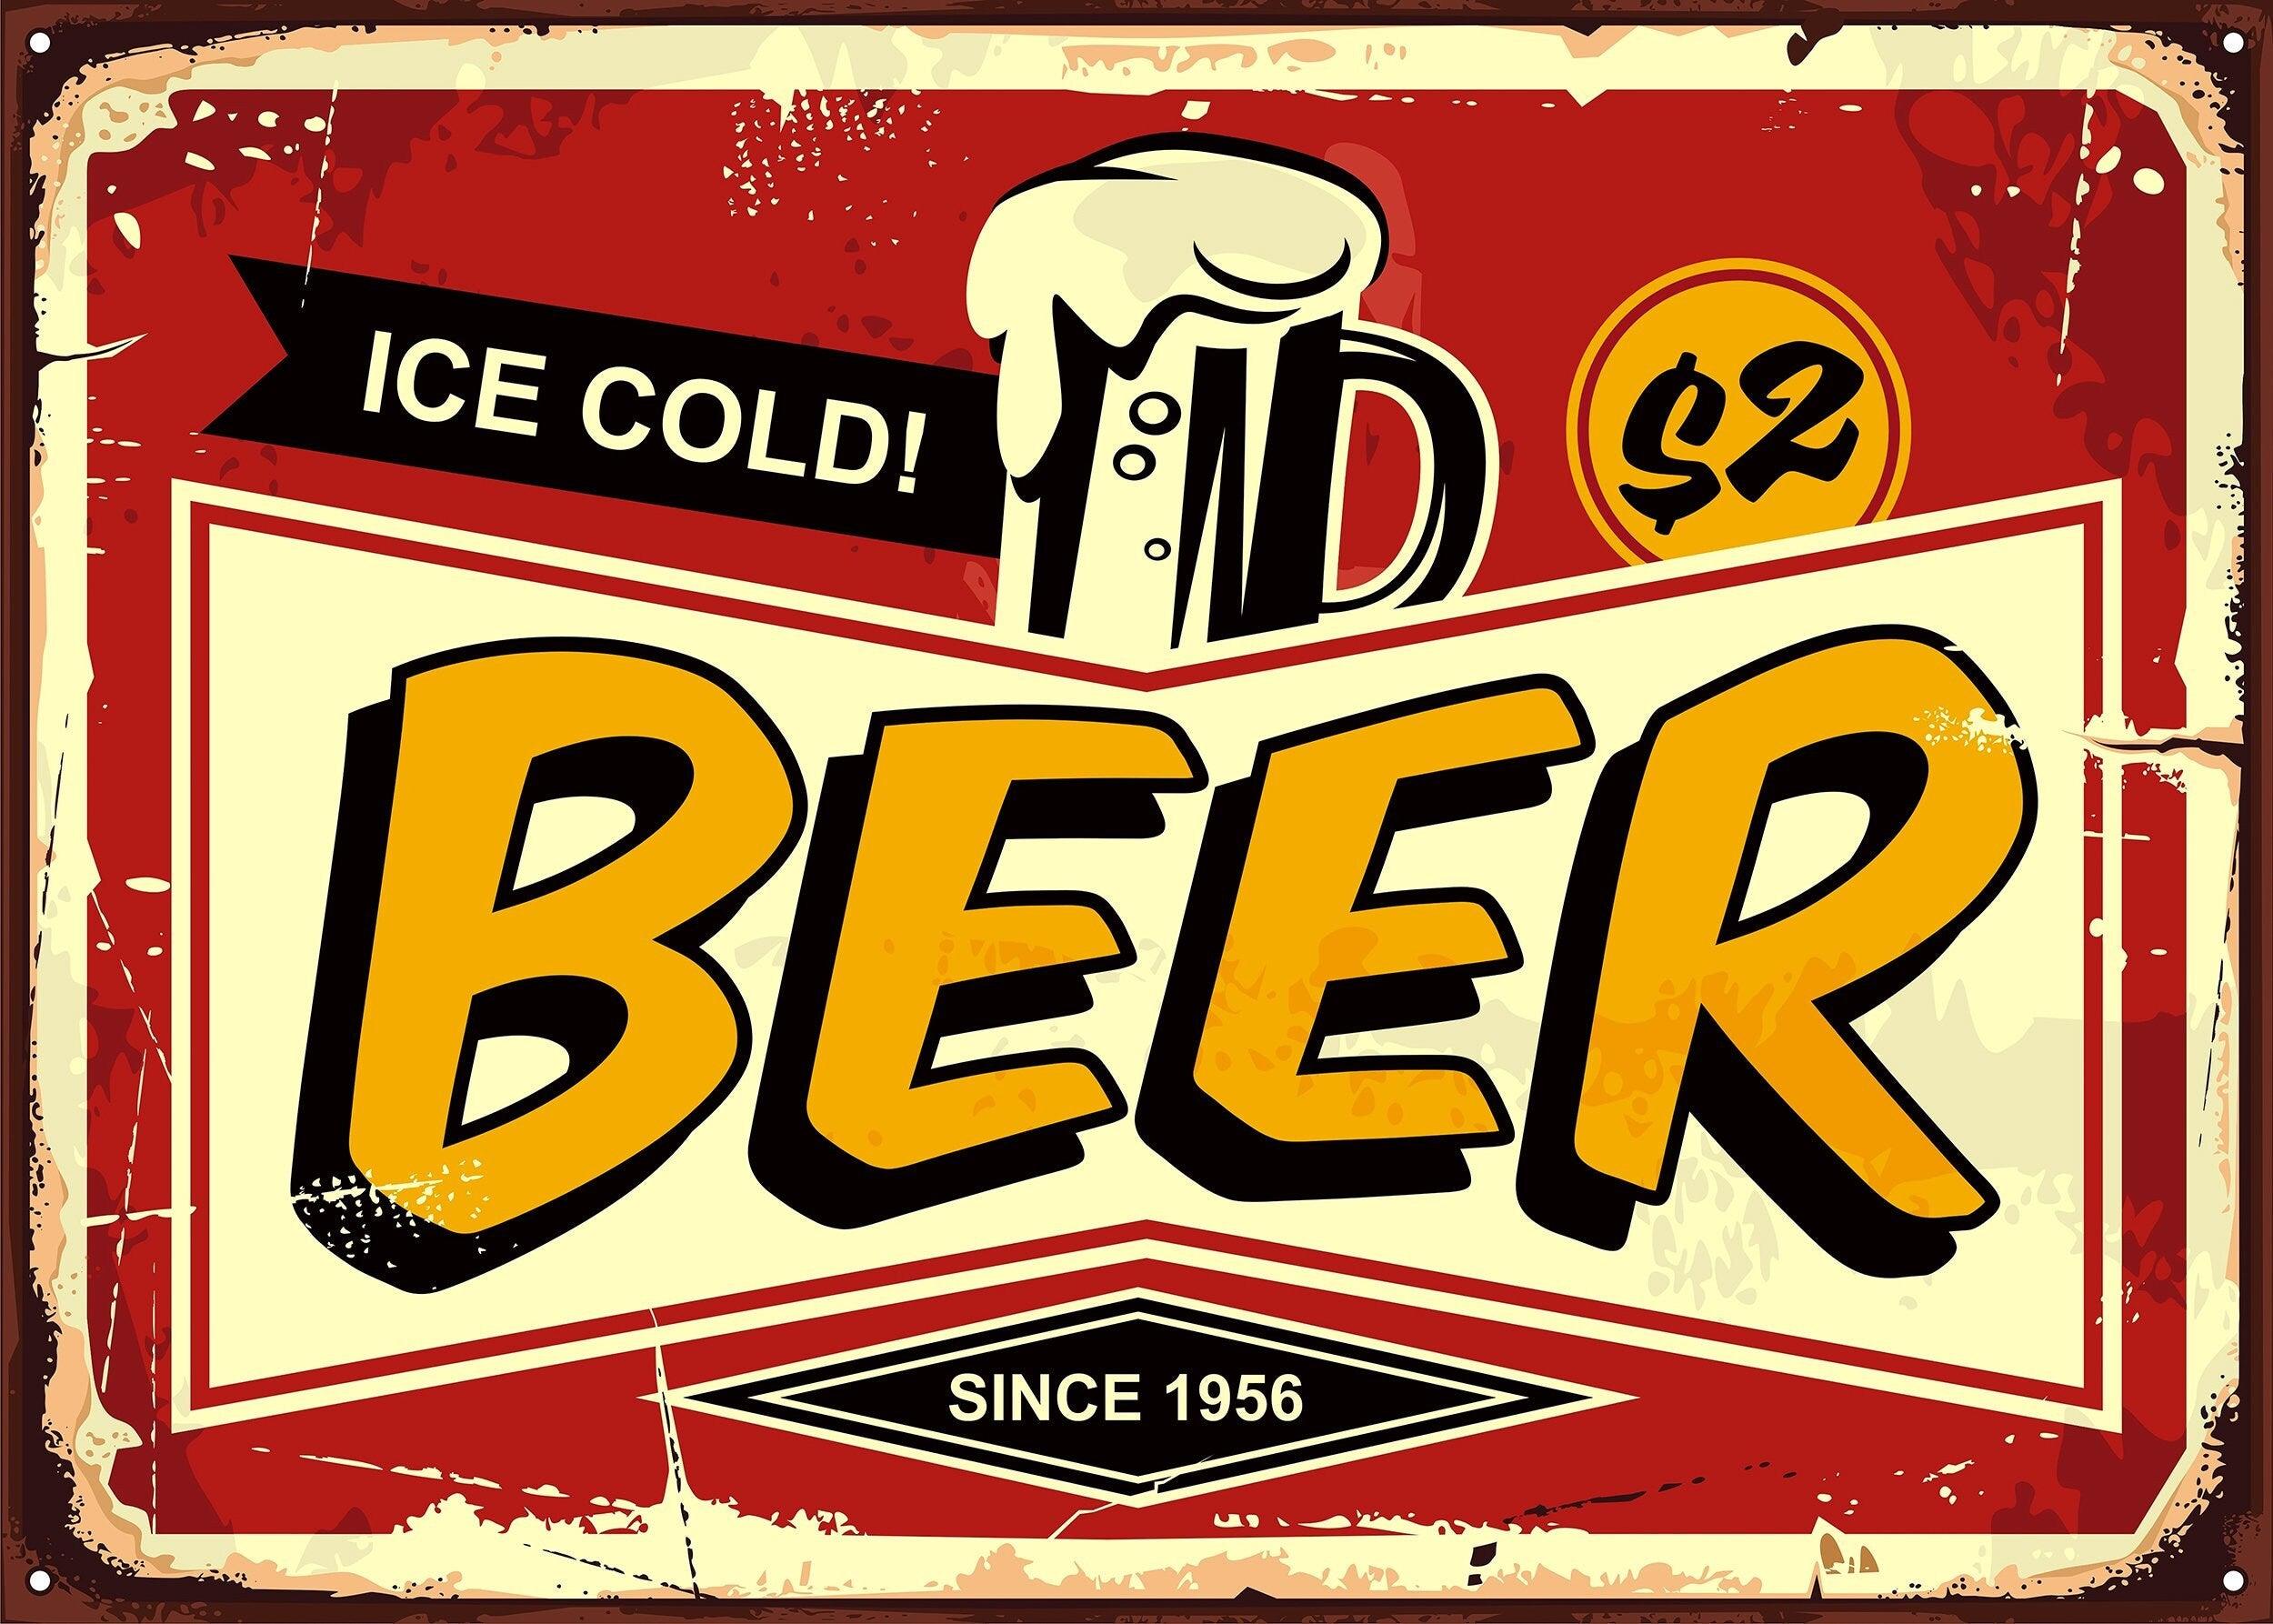 Ice Cold Beer 2 dollars Sign Decal | Fabric Decal | Removable with no Wall Damage | Vibrant | Man Cave | Beer Sign